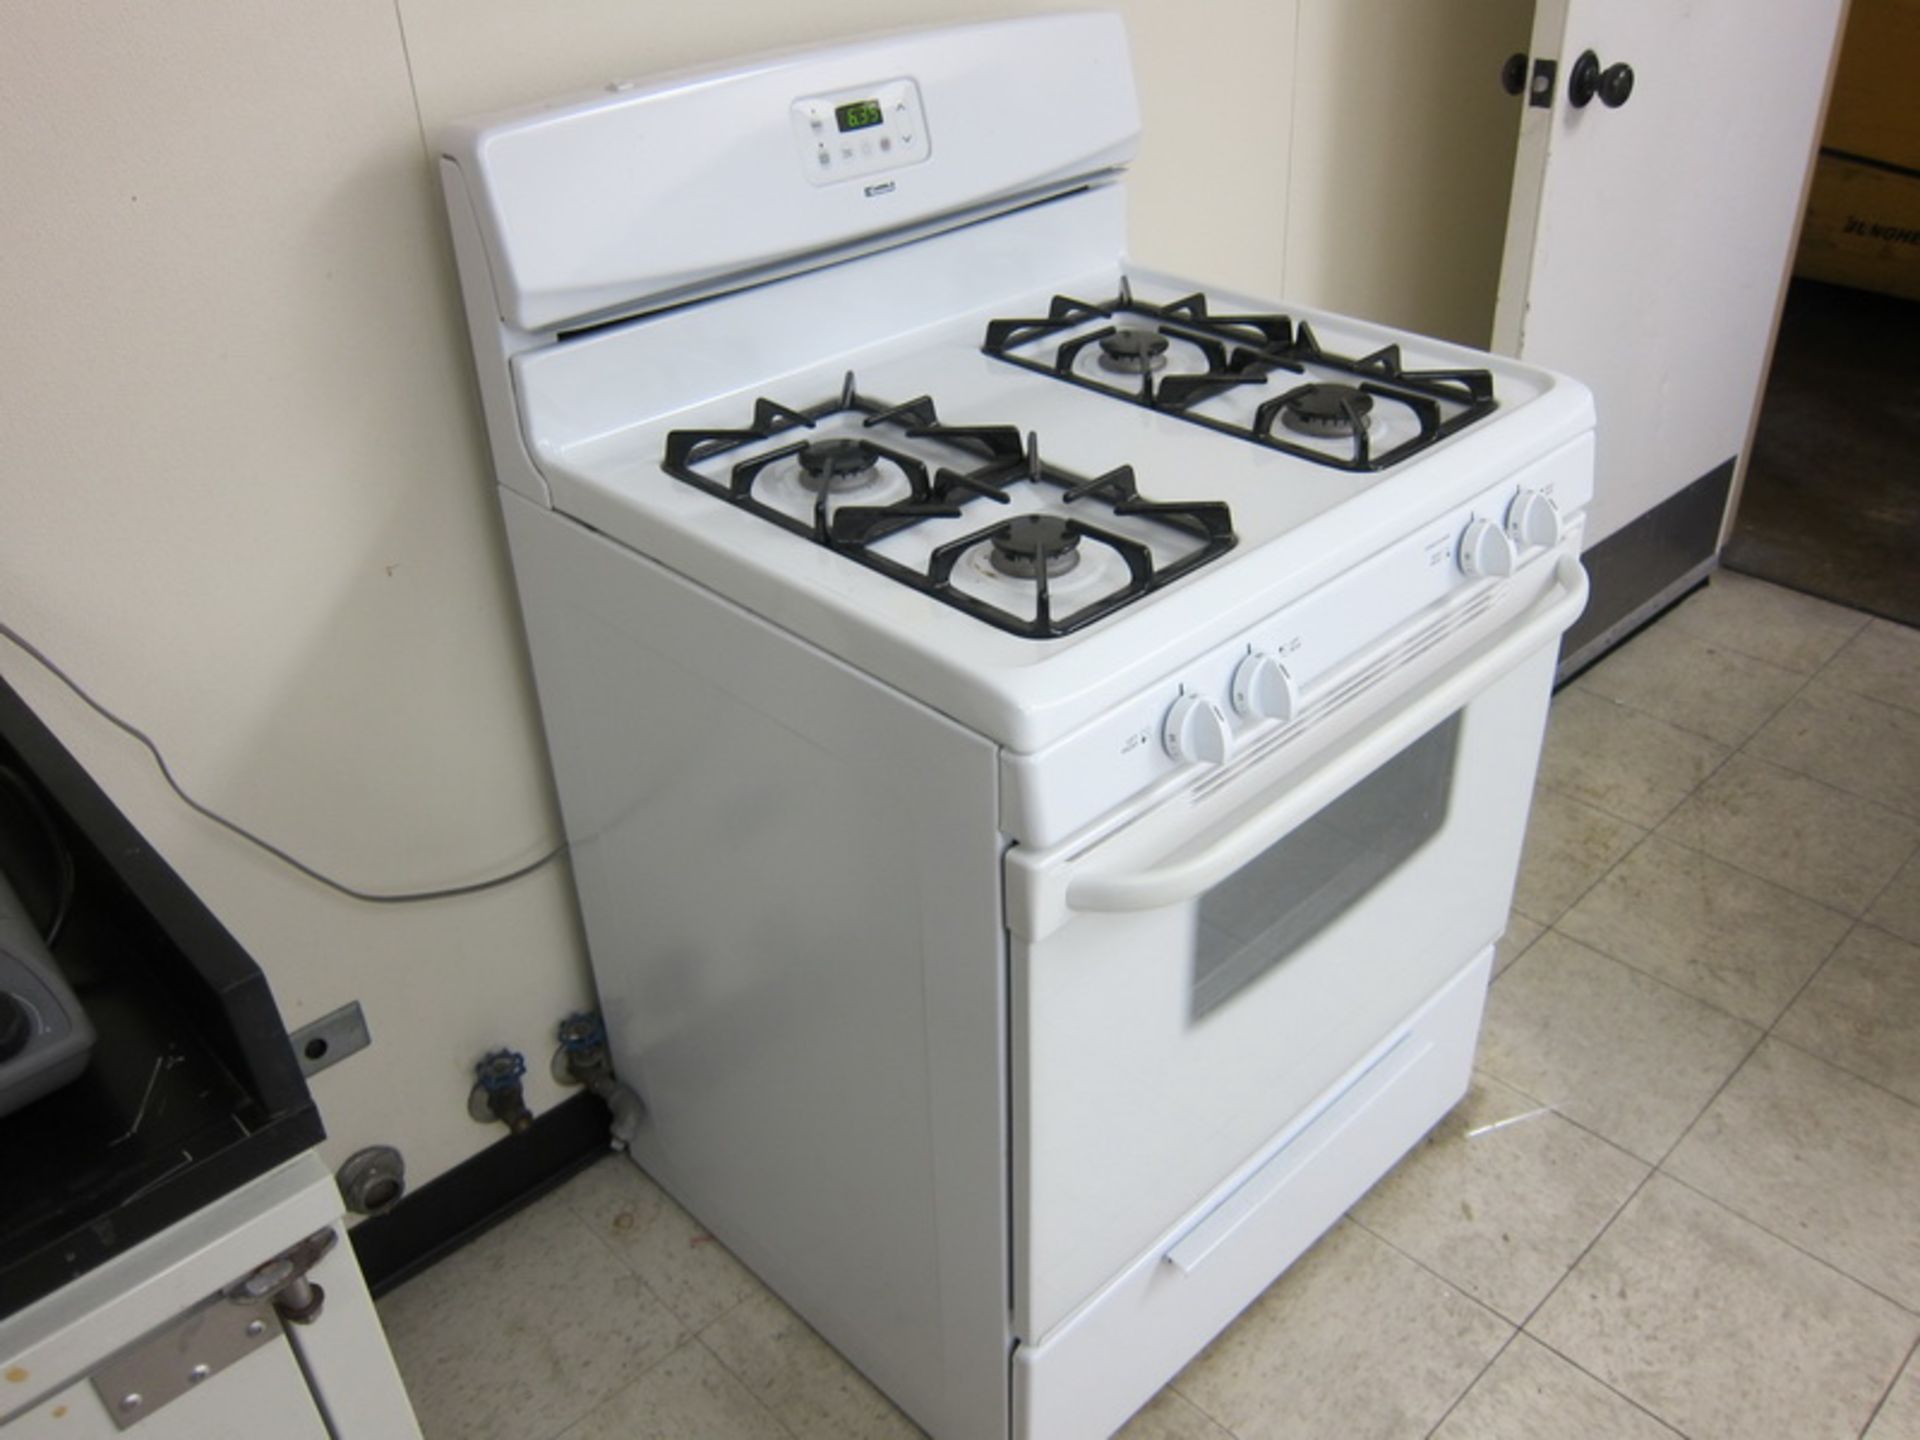 [Lot] Kenmore stove, model 790.714526, s/n VF70316988, Four burner gas stove, with bottom broiler, - Image 2 of 8